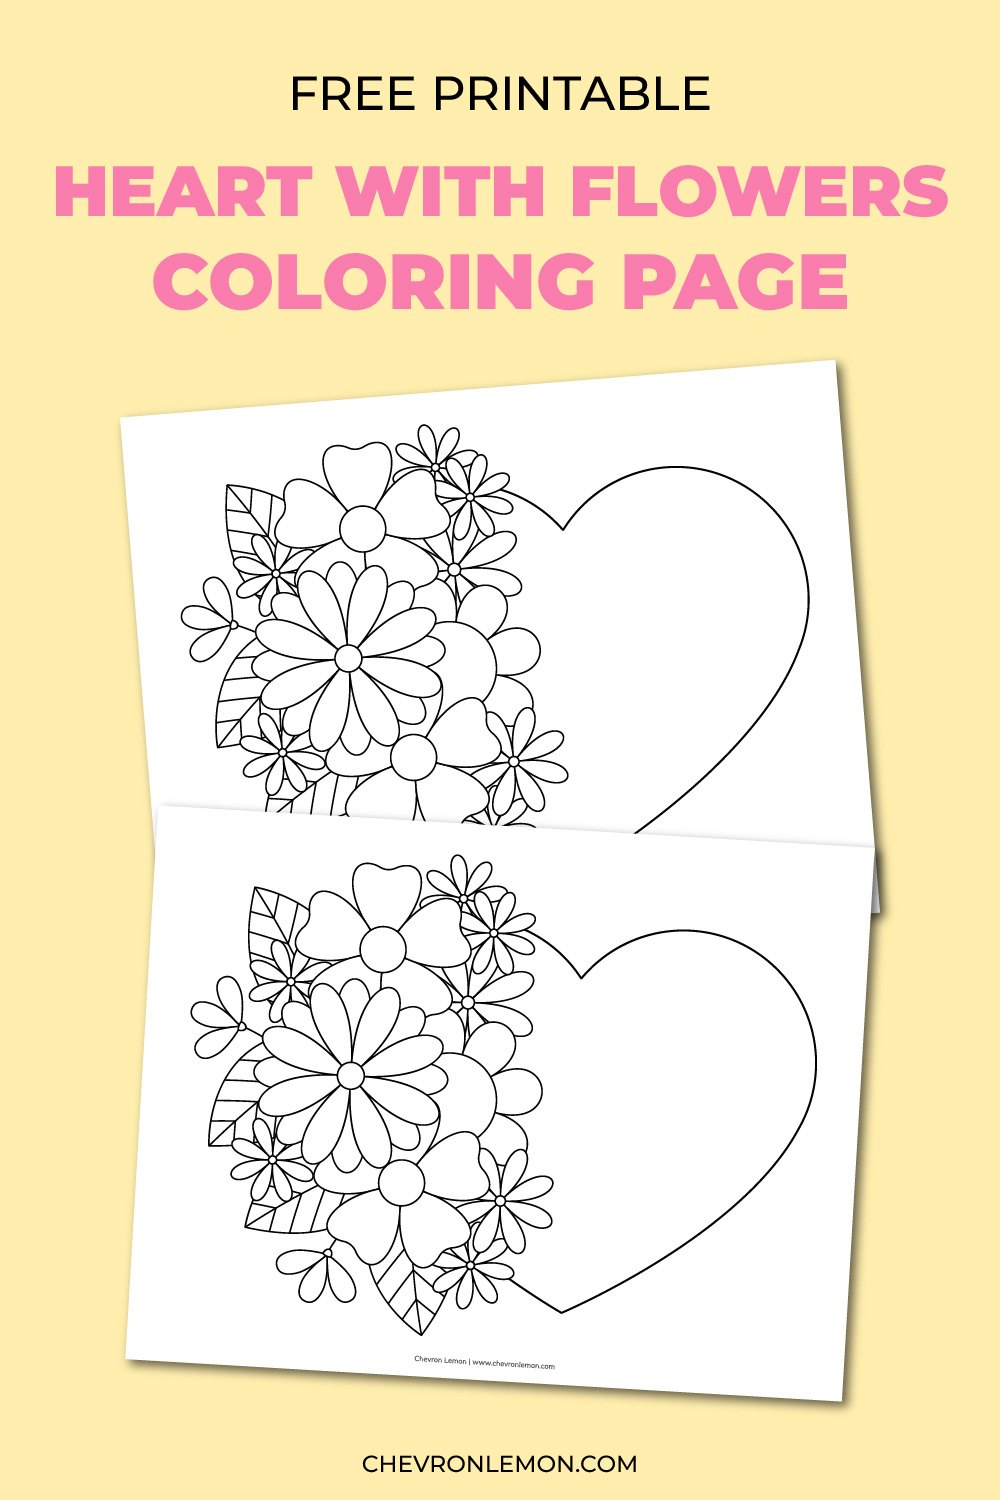 Heart with flowers coloring page